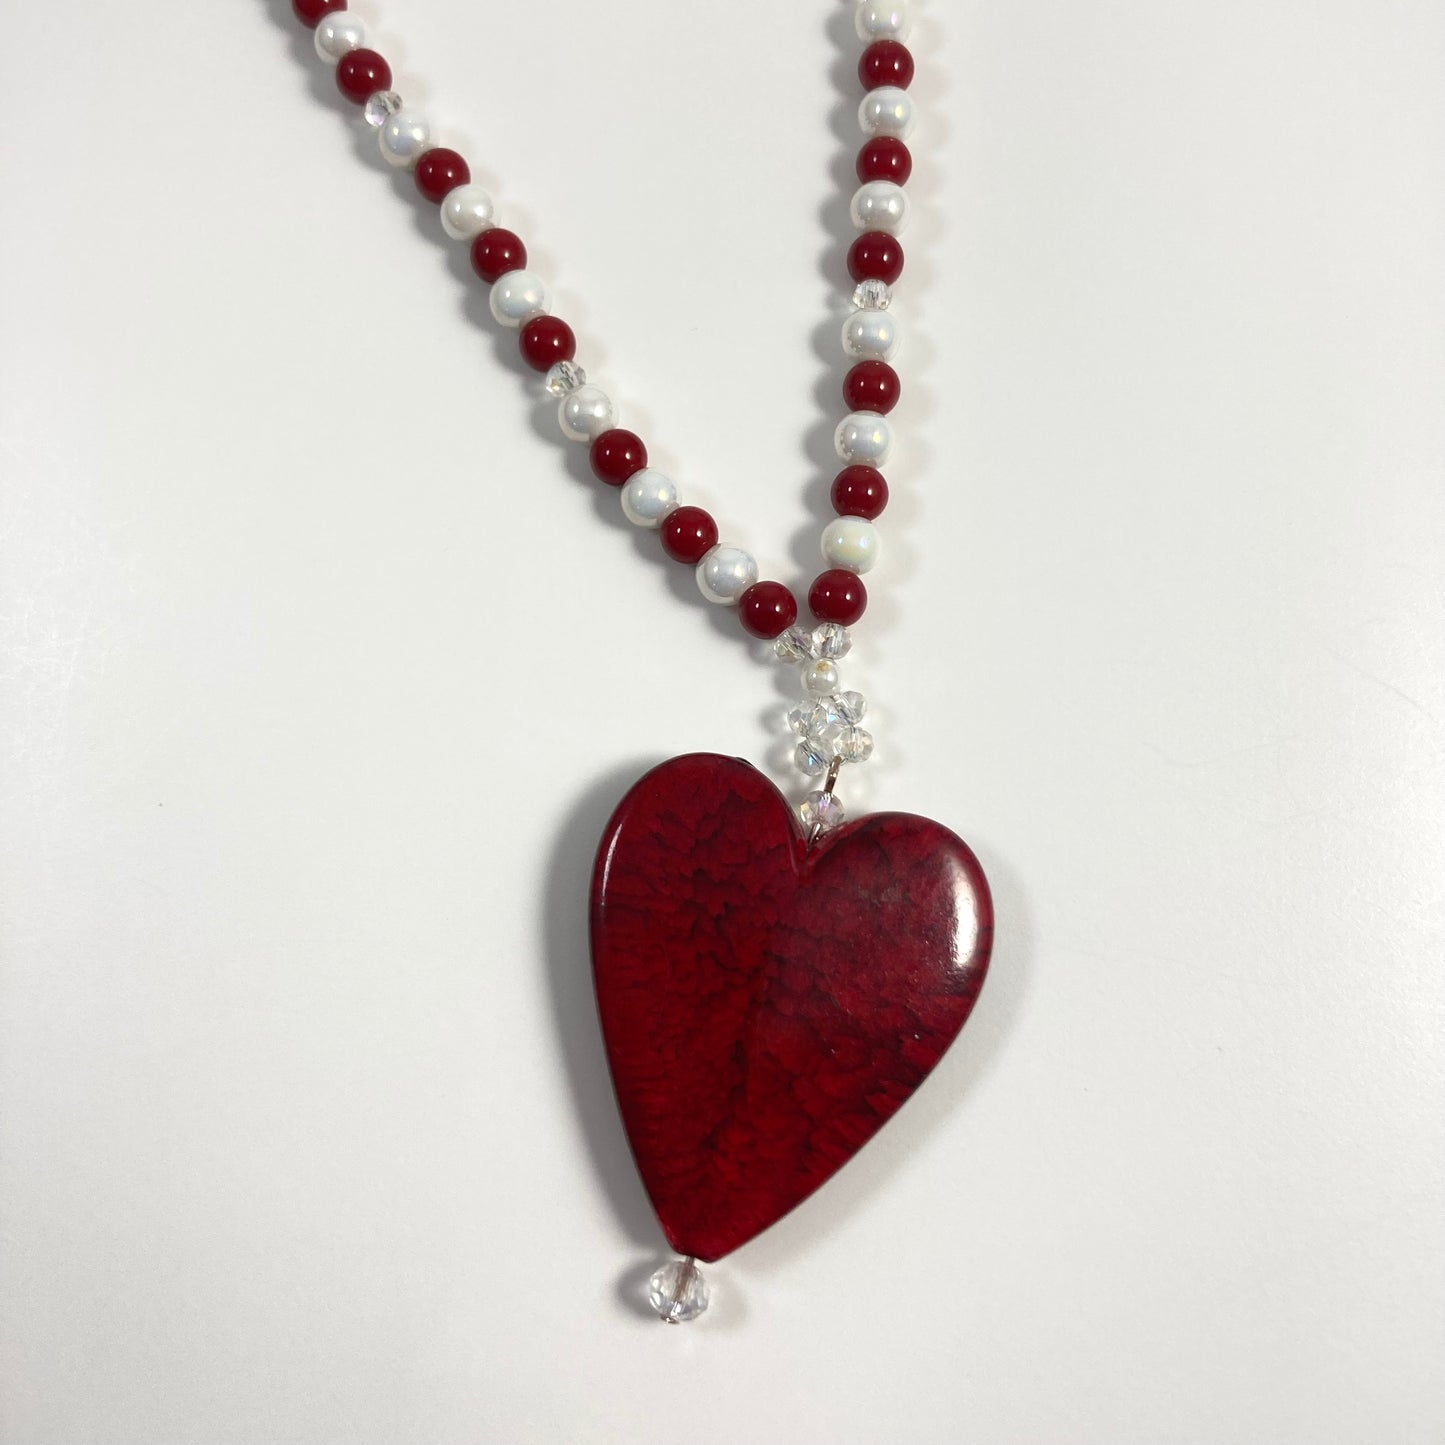 N24-C3 - Red, White & Clear Necklace w/ Red  Heart Focal on Gold Chain